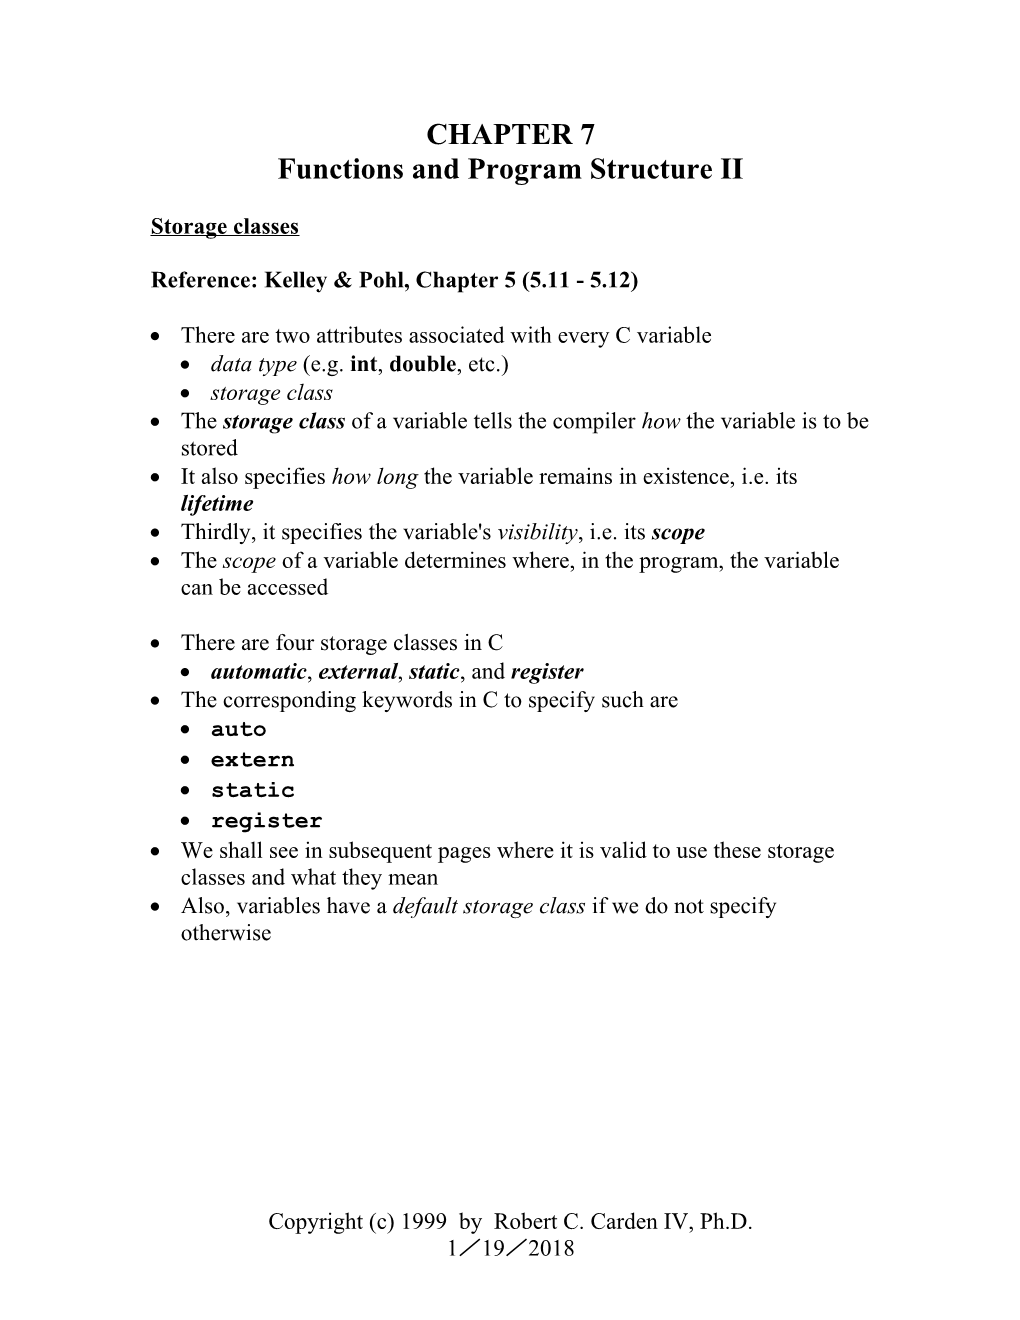 Functions and Program Structure II